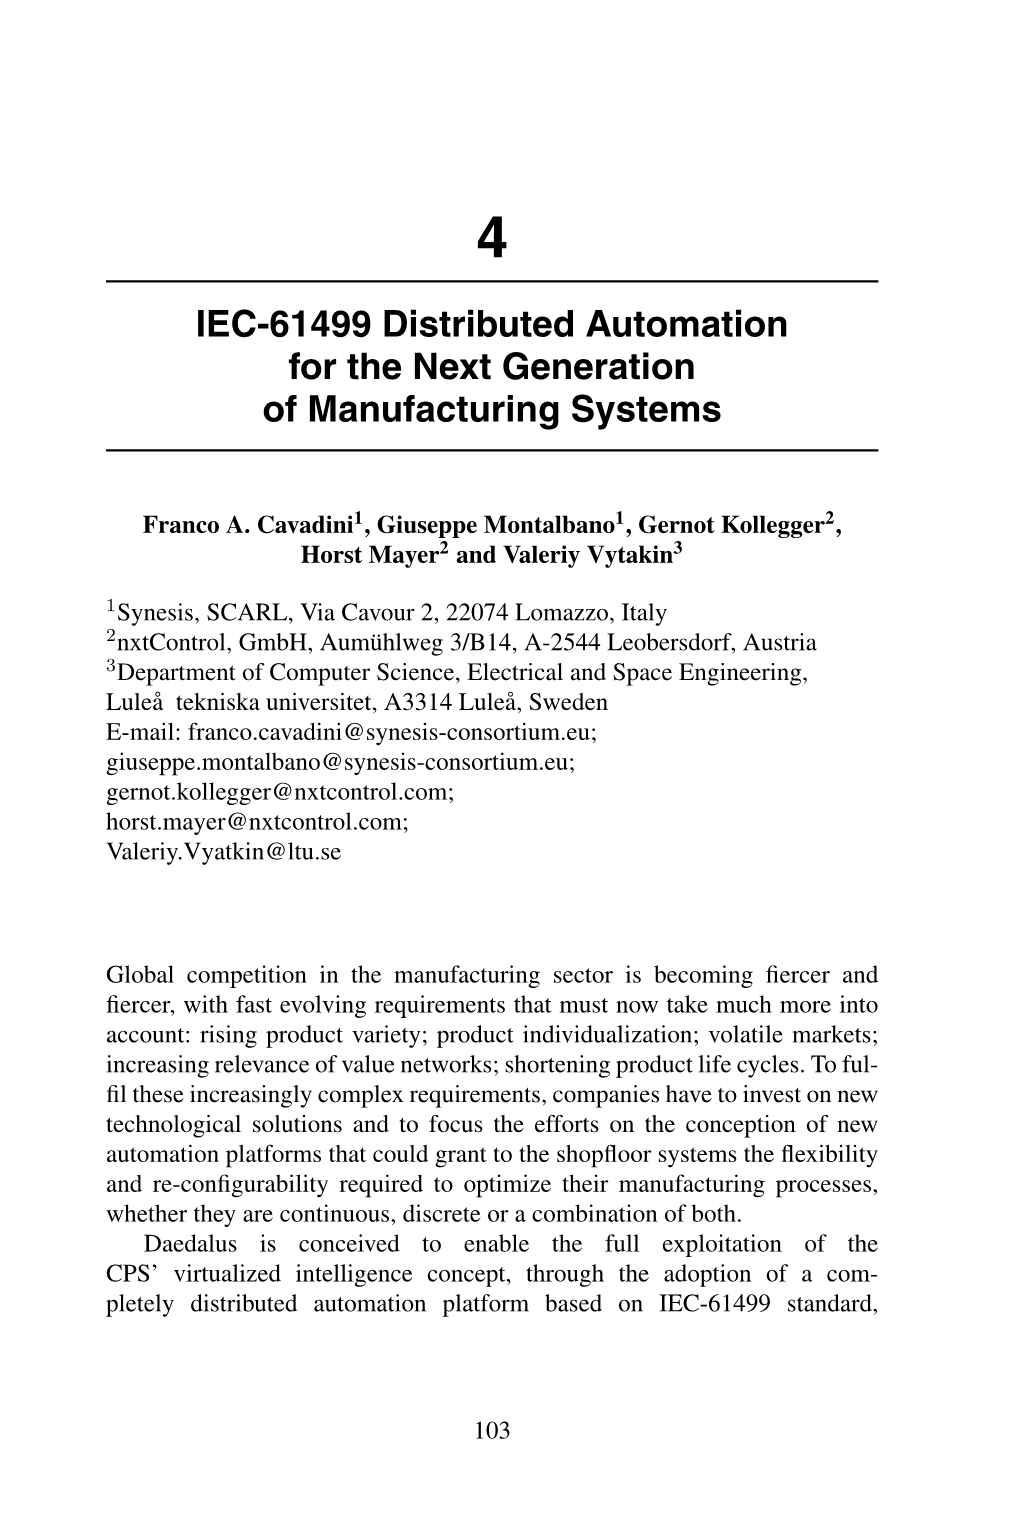 IEC-61499 Distributed Automation for the Next Generation of Manufacturing Systems